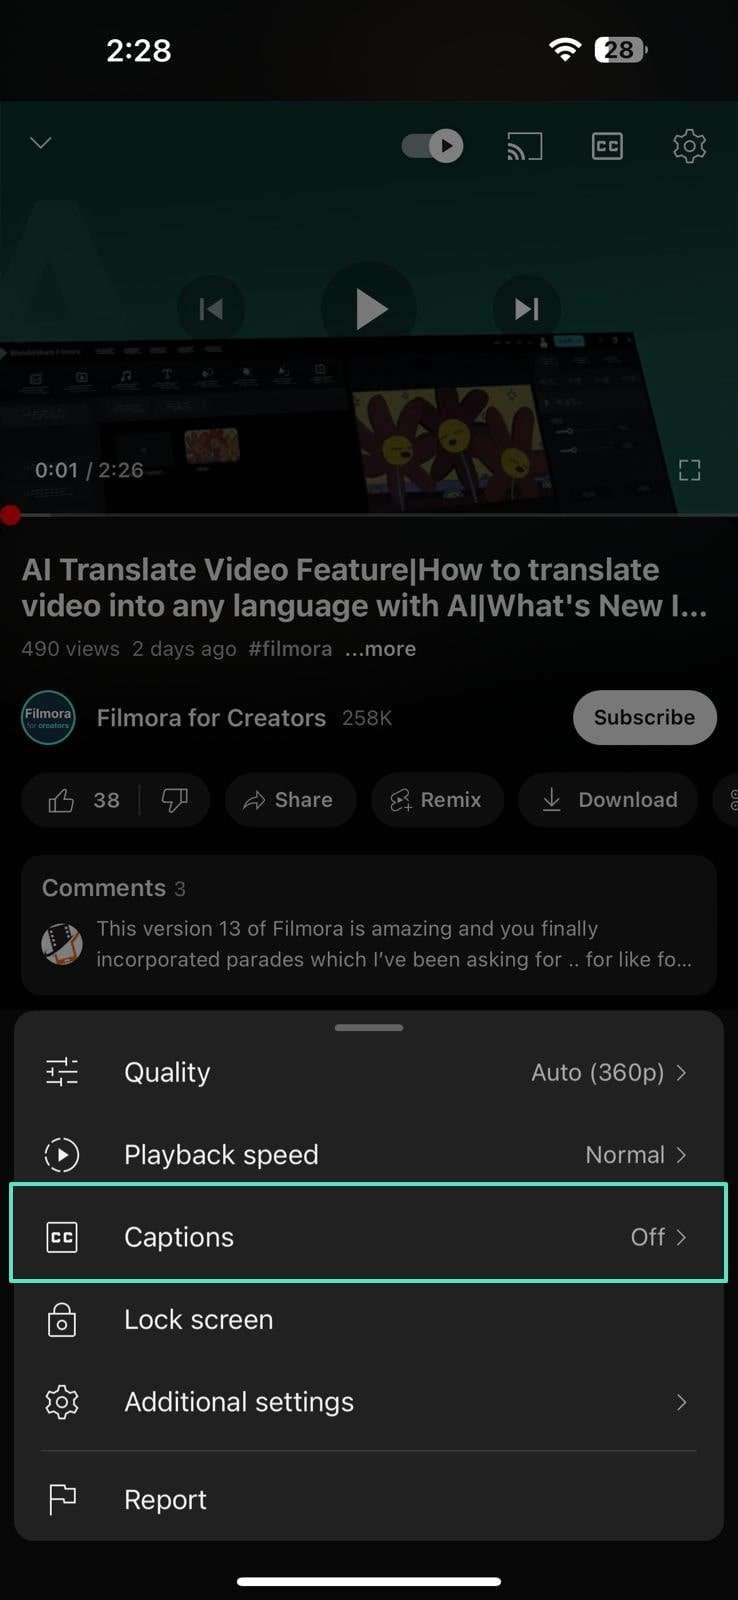 tap the captions option